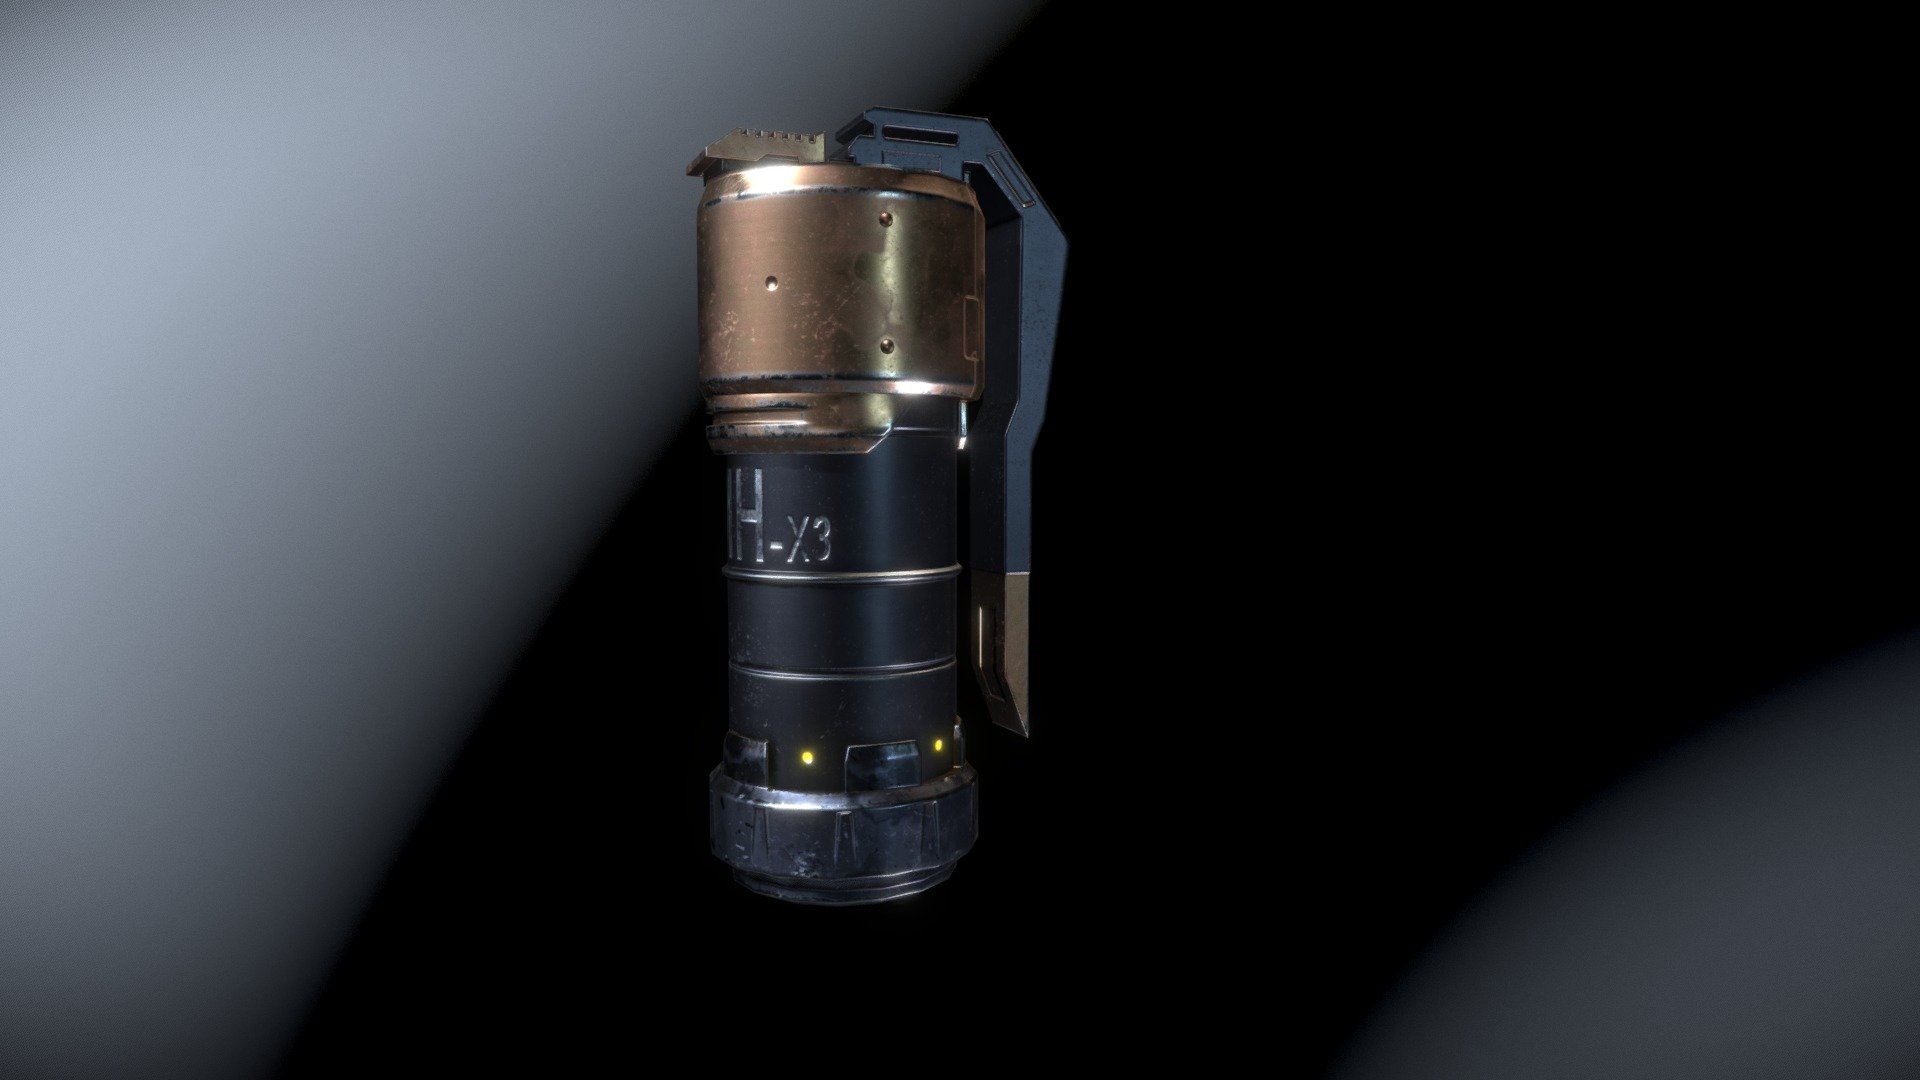 Sci-fi grenade MH-x3.
Game ready asset.
Model was made based on the concept of this artist https://www.deviantart.com/sir&ndash;render - Sci-fi grenade - 3D model by Lordies 3d model